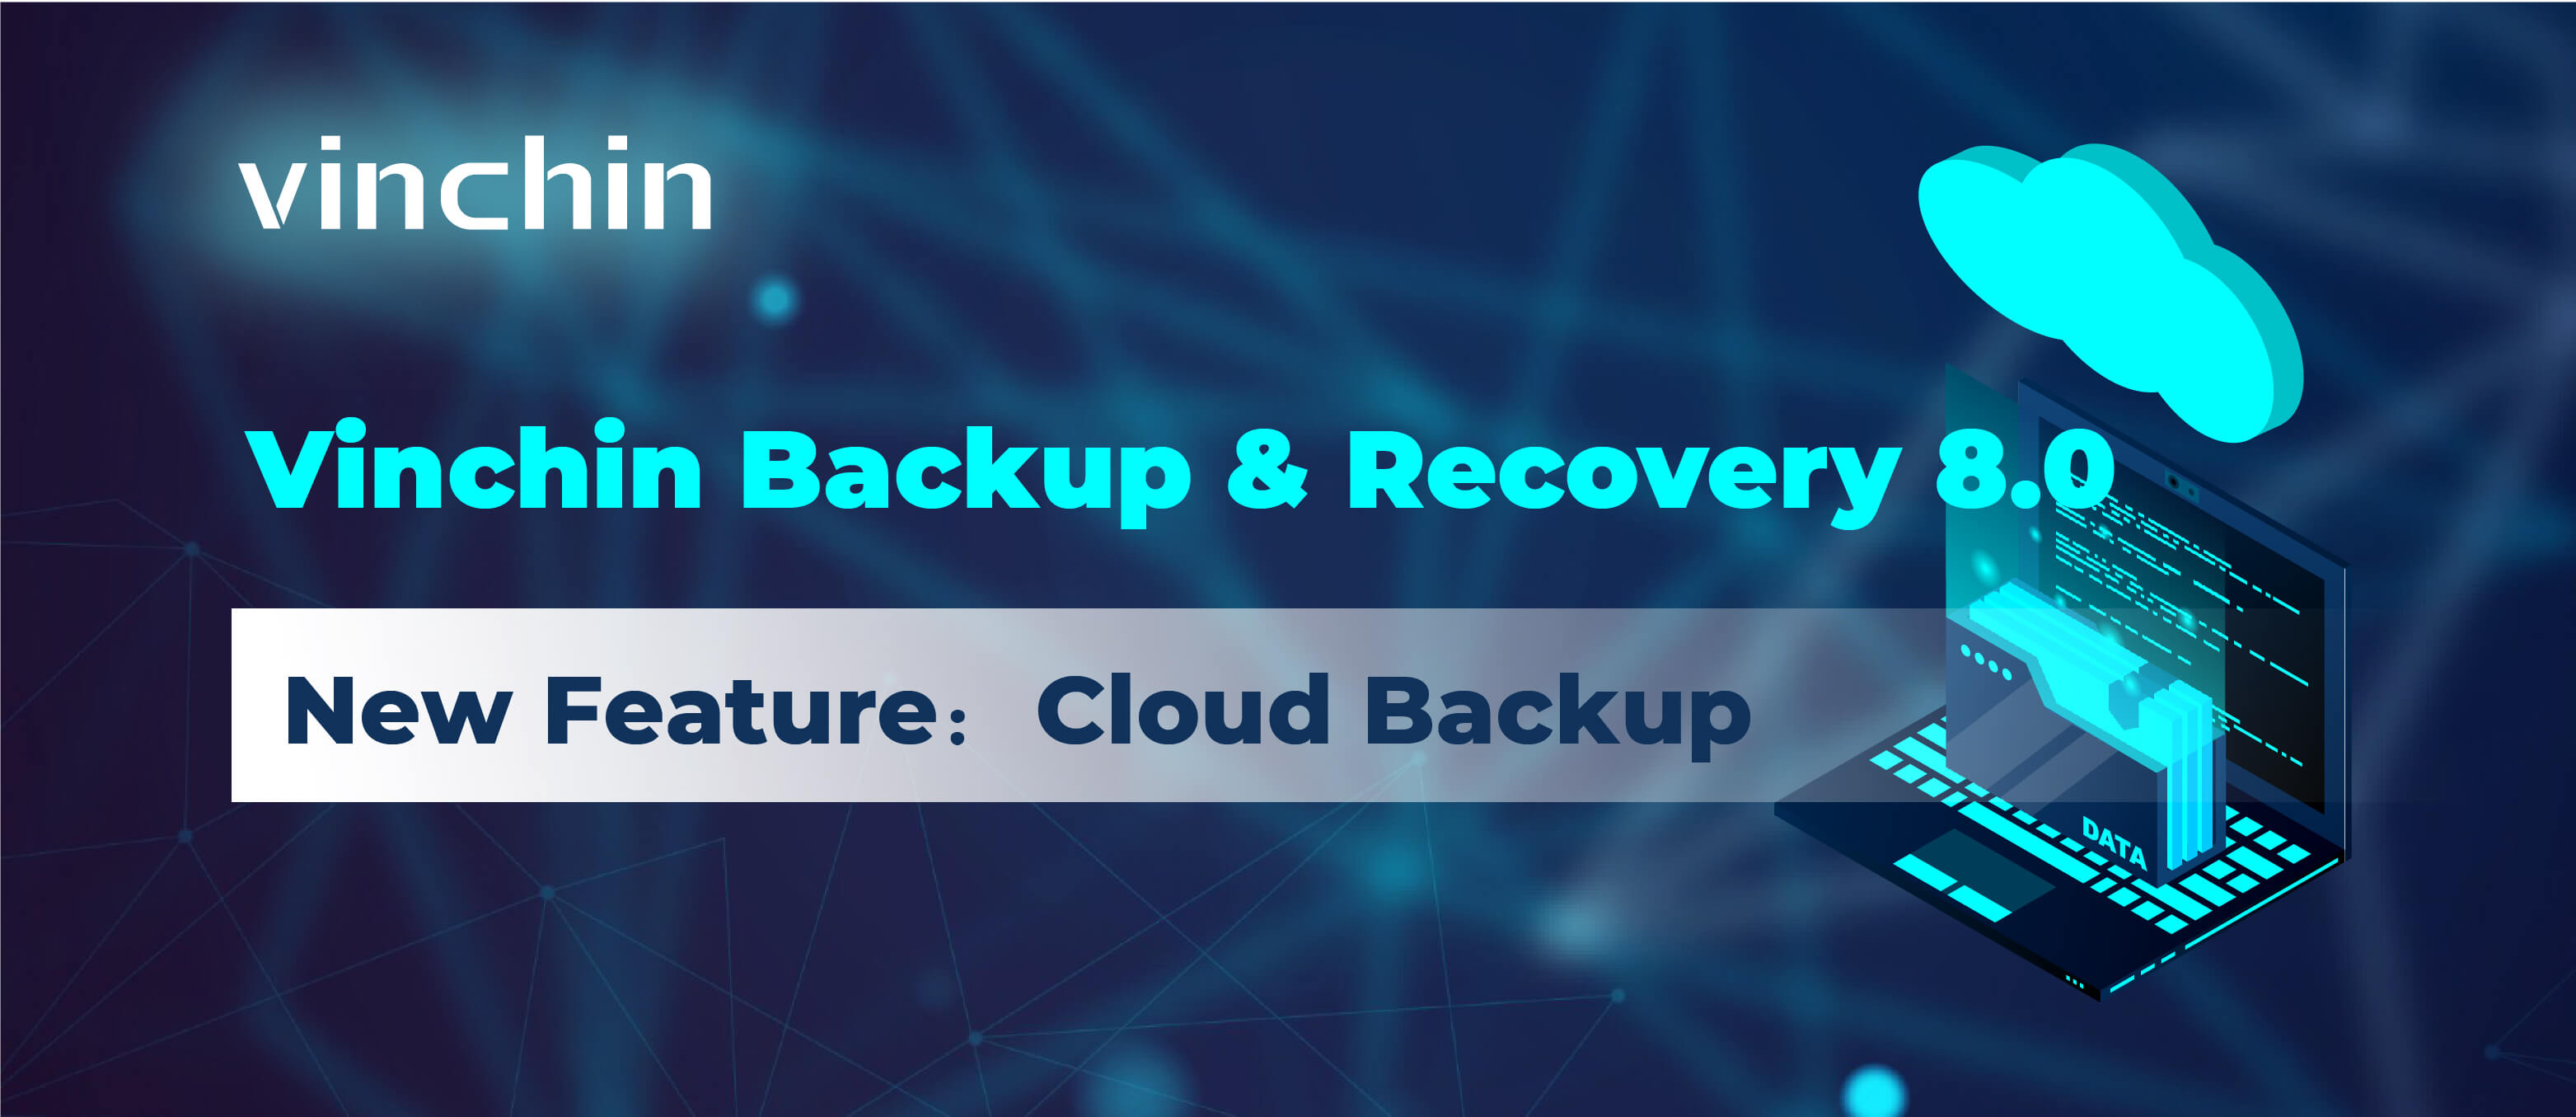 vinchin, backup, recovery, archive, vinchin backup & recovery 8.0, cdp, agentless aws ec2 backup, exchange, cloud backup, data protection